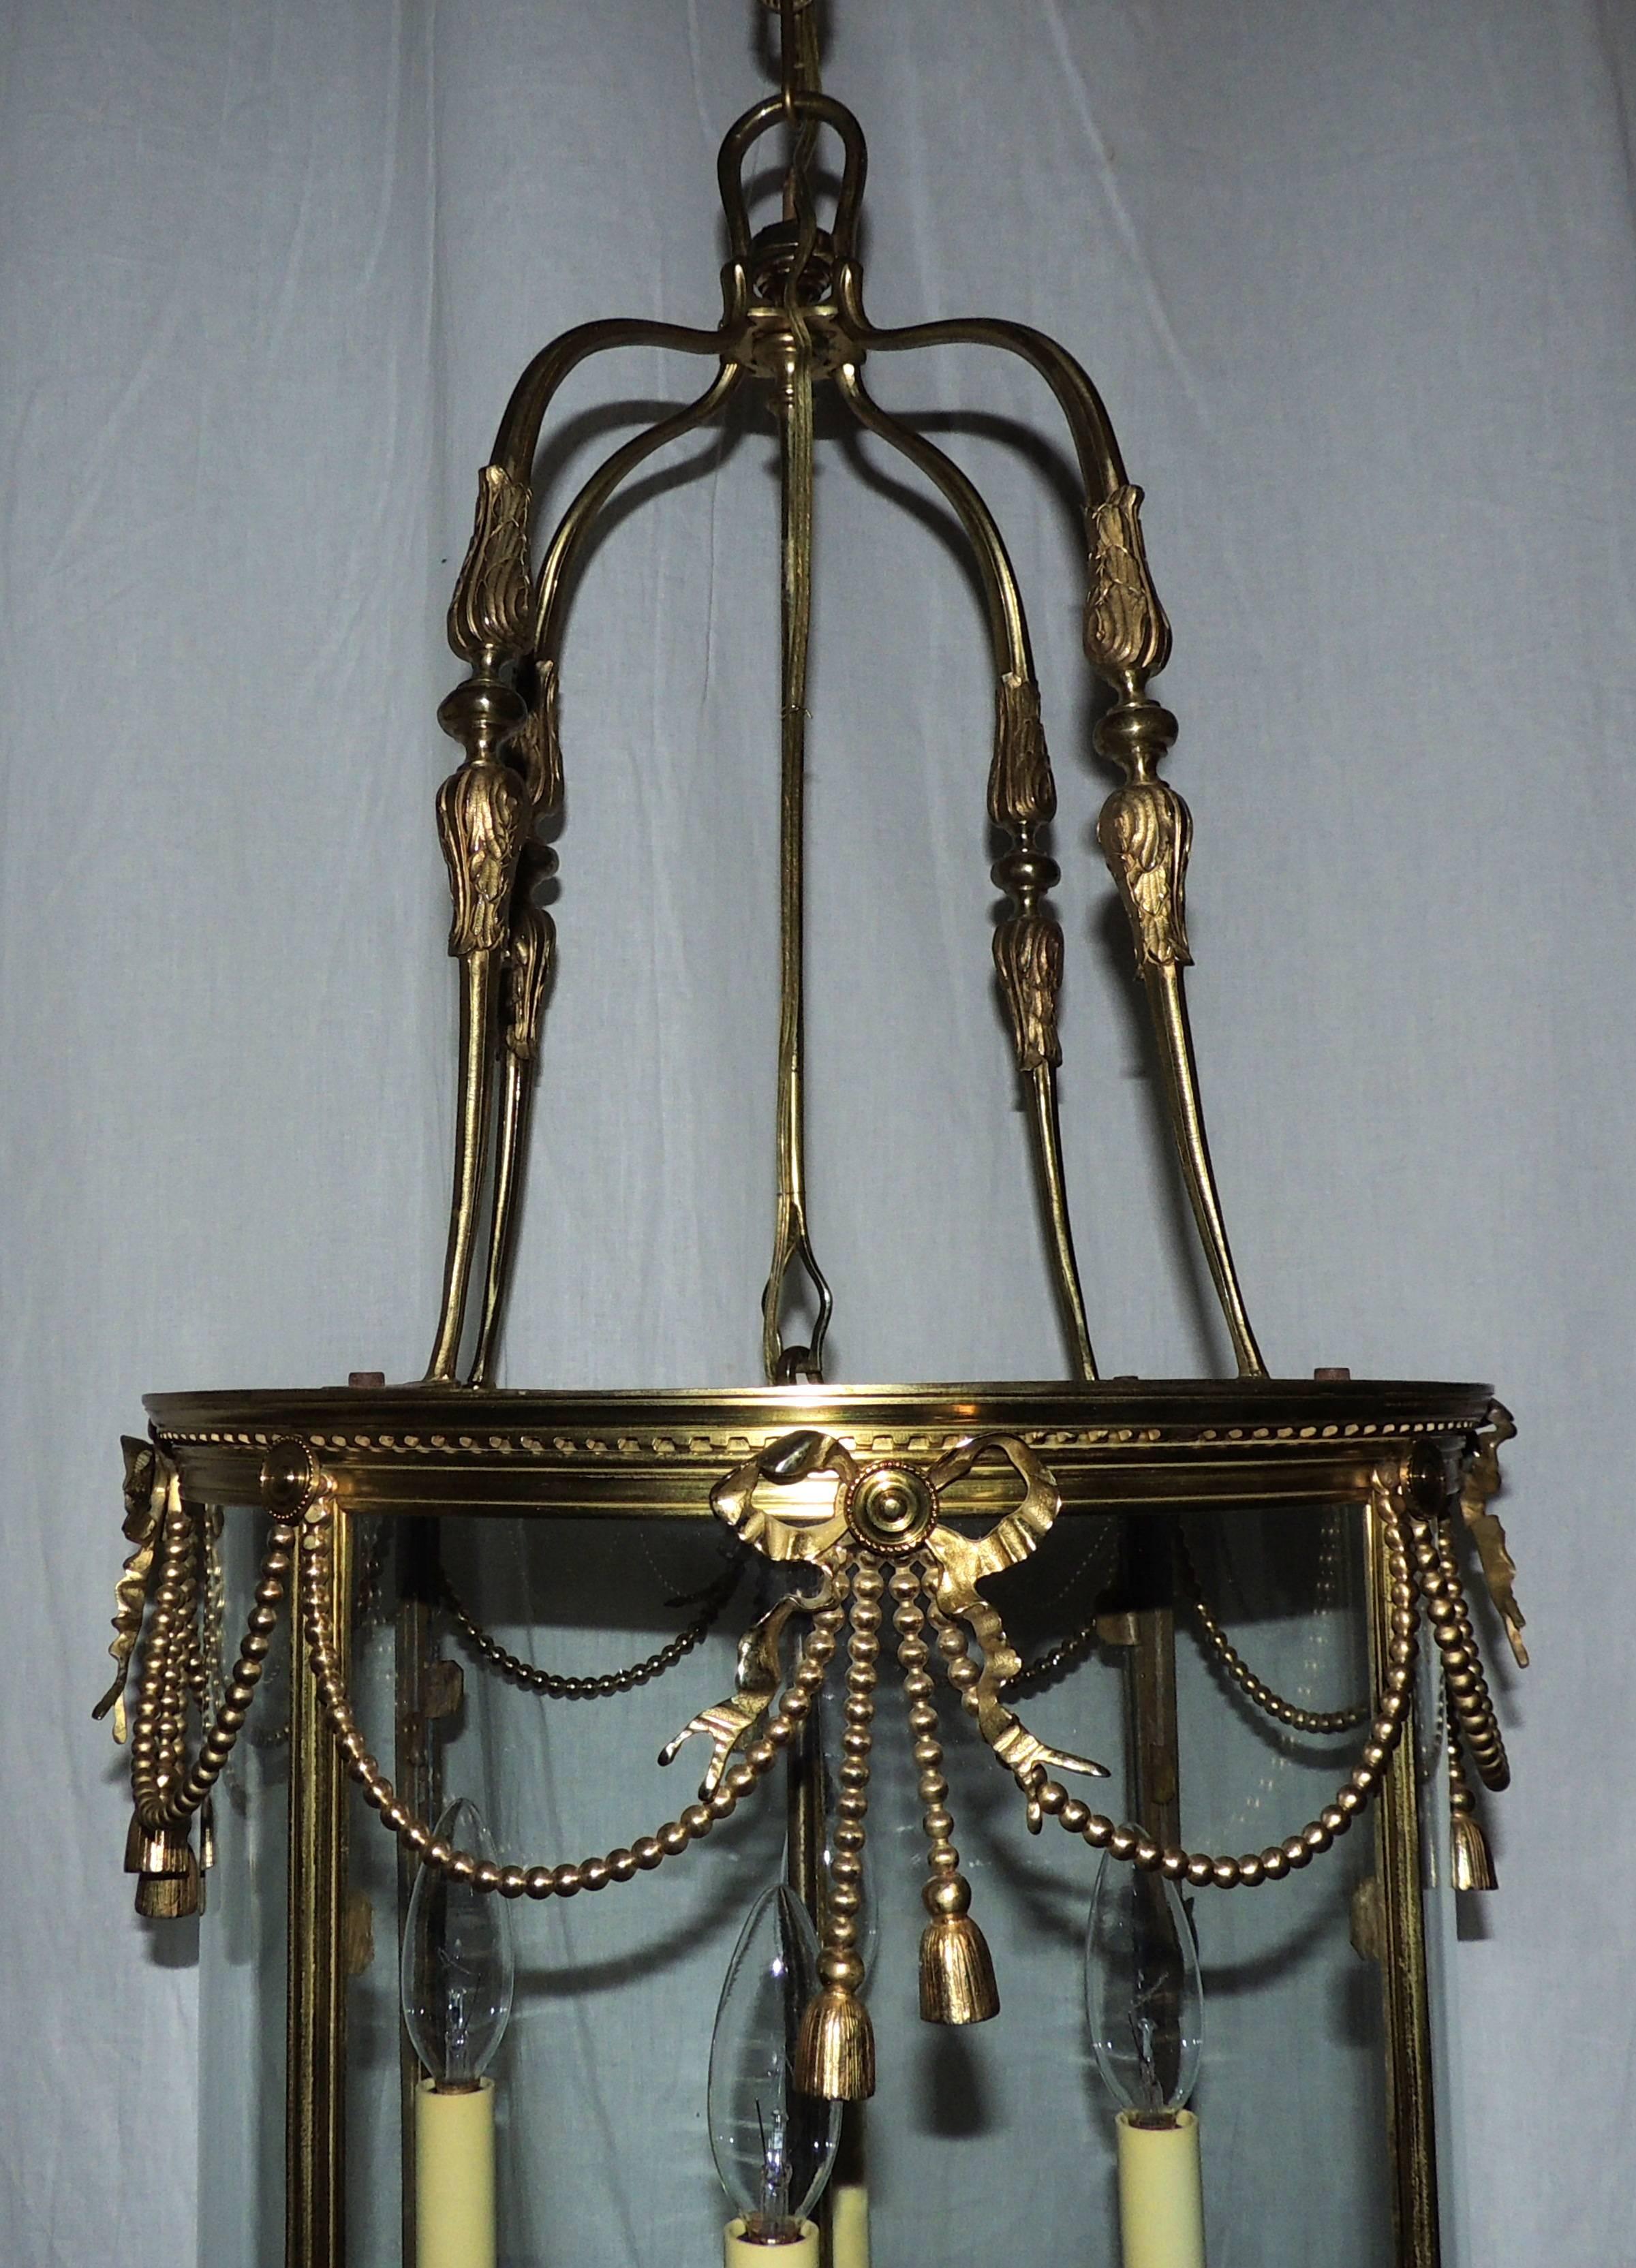 An outstanding French gilt bronze ribbon, bow lantern round bent glass panel chandelier fixture.